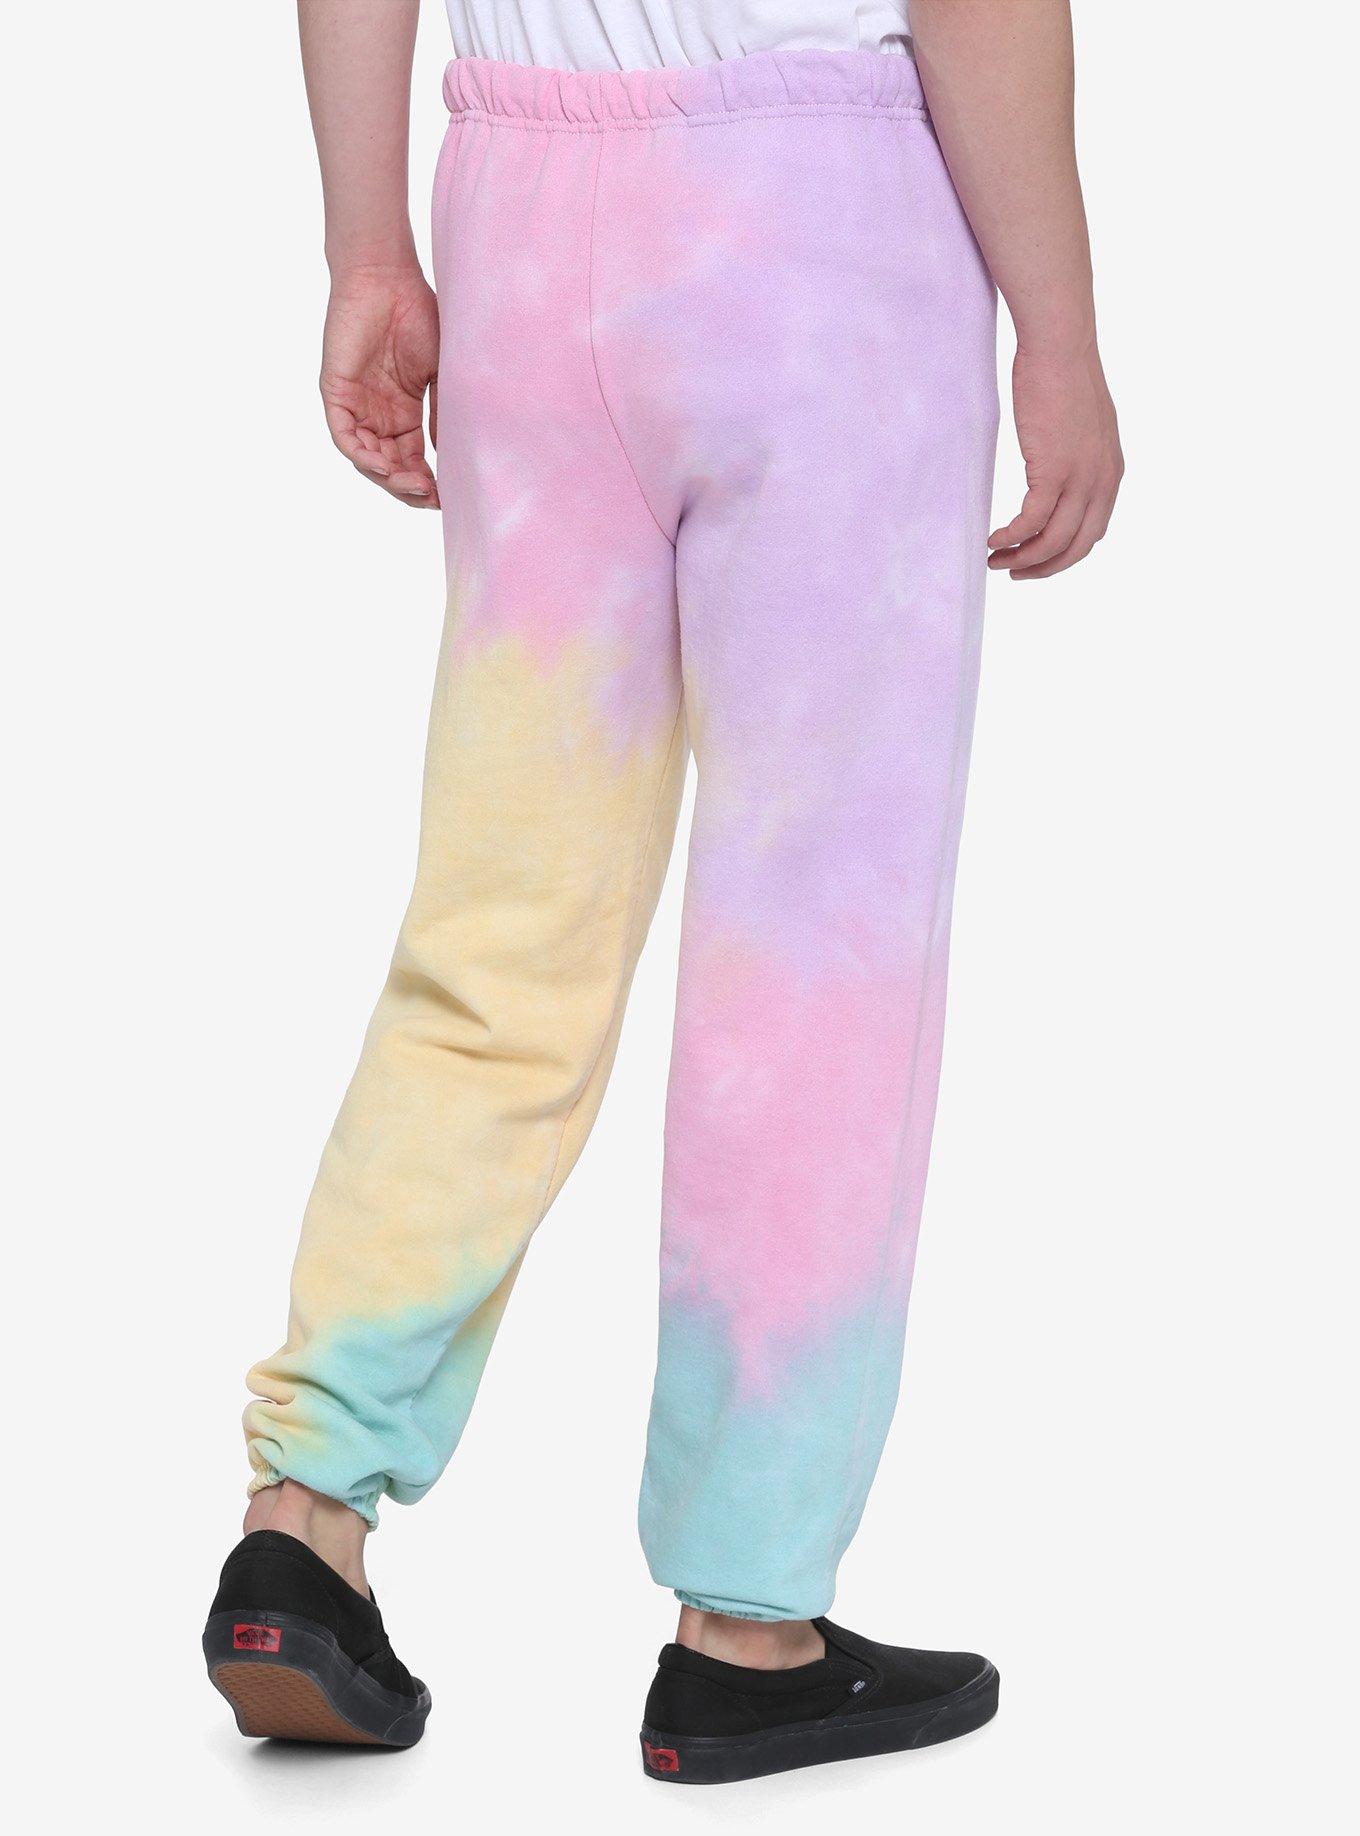 Hello Kitty x Cup Noodles Character Tie Dye Print Joggers-Small (28-30) 